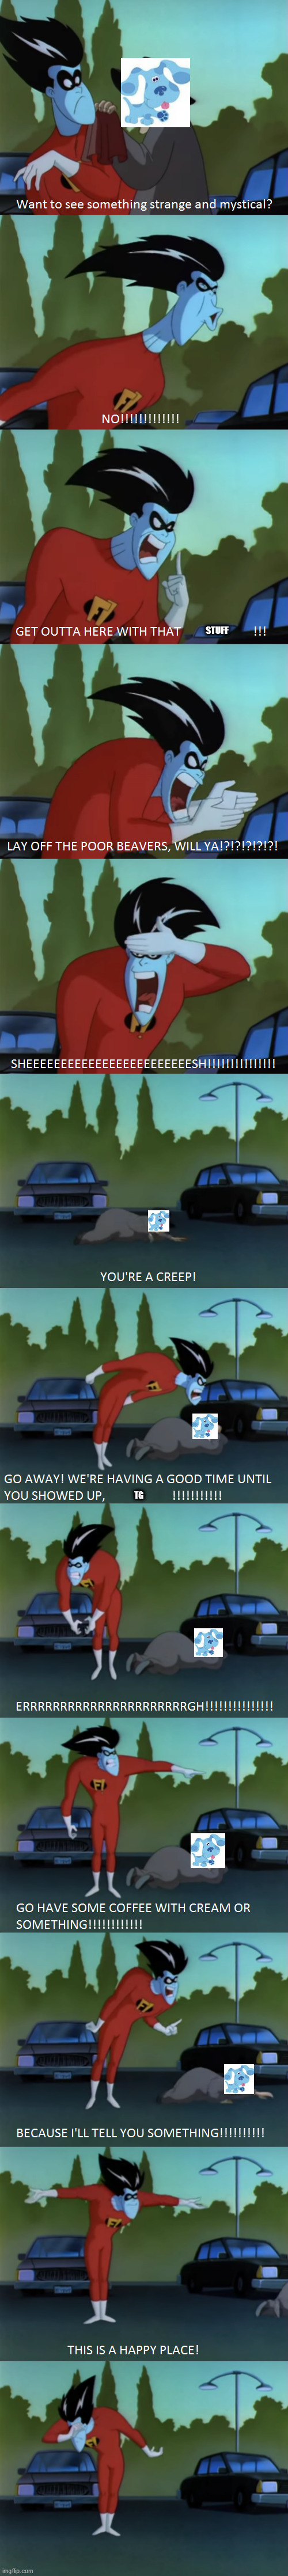 Freakazoid deals with TGDC20610 | STUFF; TG | image tagged in freakazoid know how to deal with creeps,tgdc20610,deviantart,weirdo,creep,creeps | made w/ Imgflip meme maker